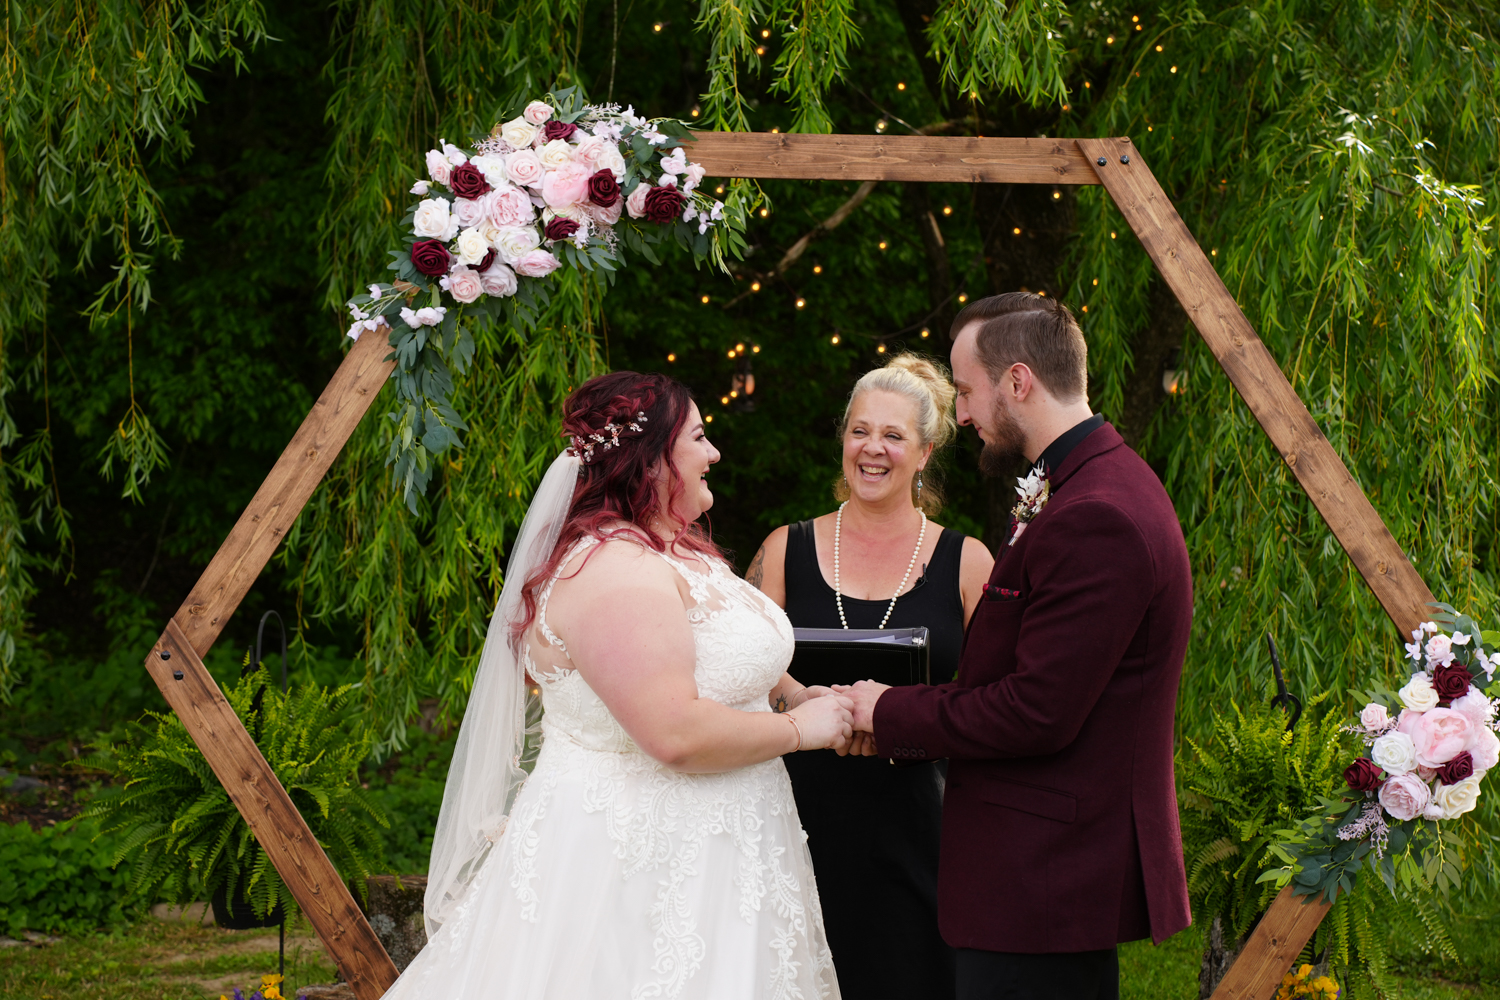 Wedding ceremony at a hexagon arbor with pink and burgundy Ling's moments garlands under a willow tree with fairy lights as Regina Starkey of Honeysuckle Hills officiates